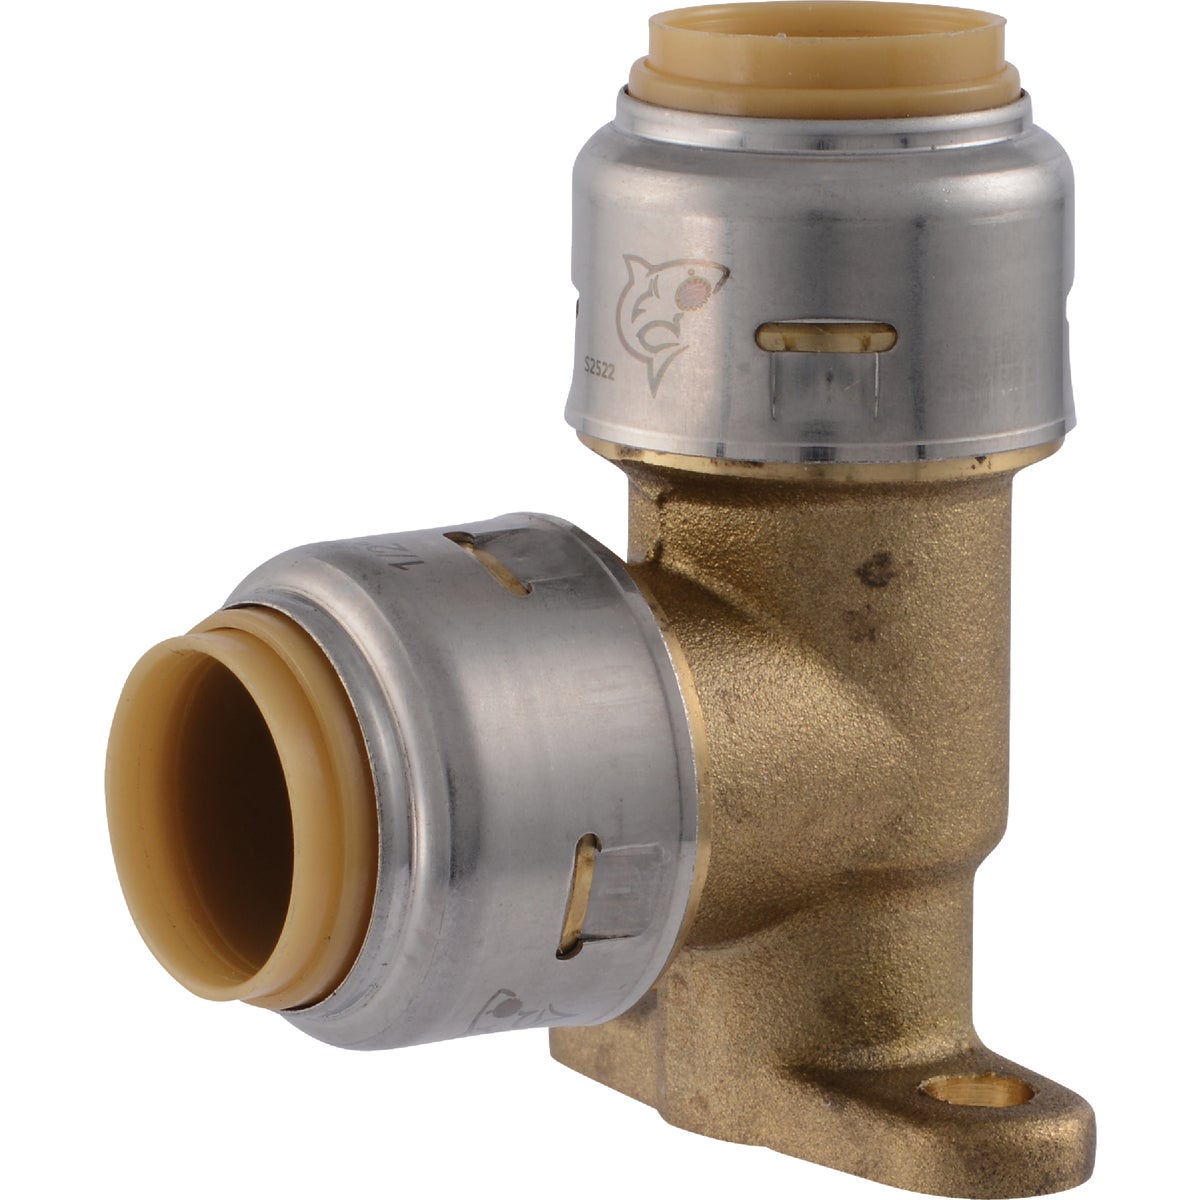 Item 464367, SharkBite Max push-to-connect fittings allow you make pipe connections with